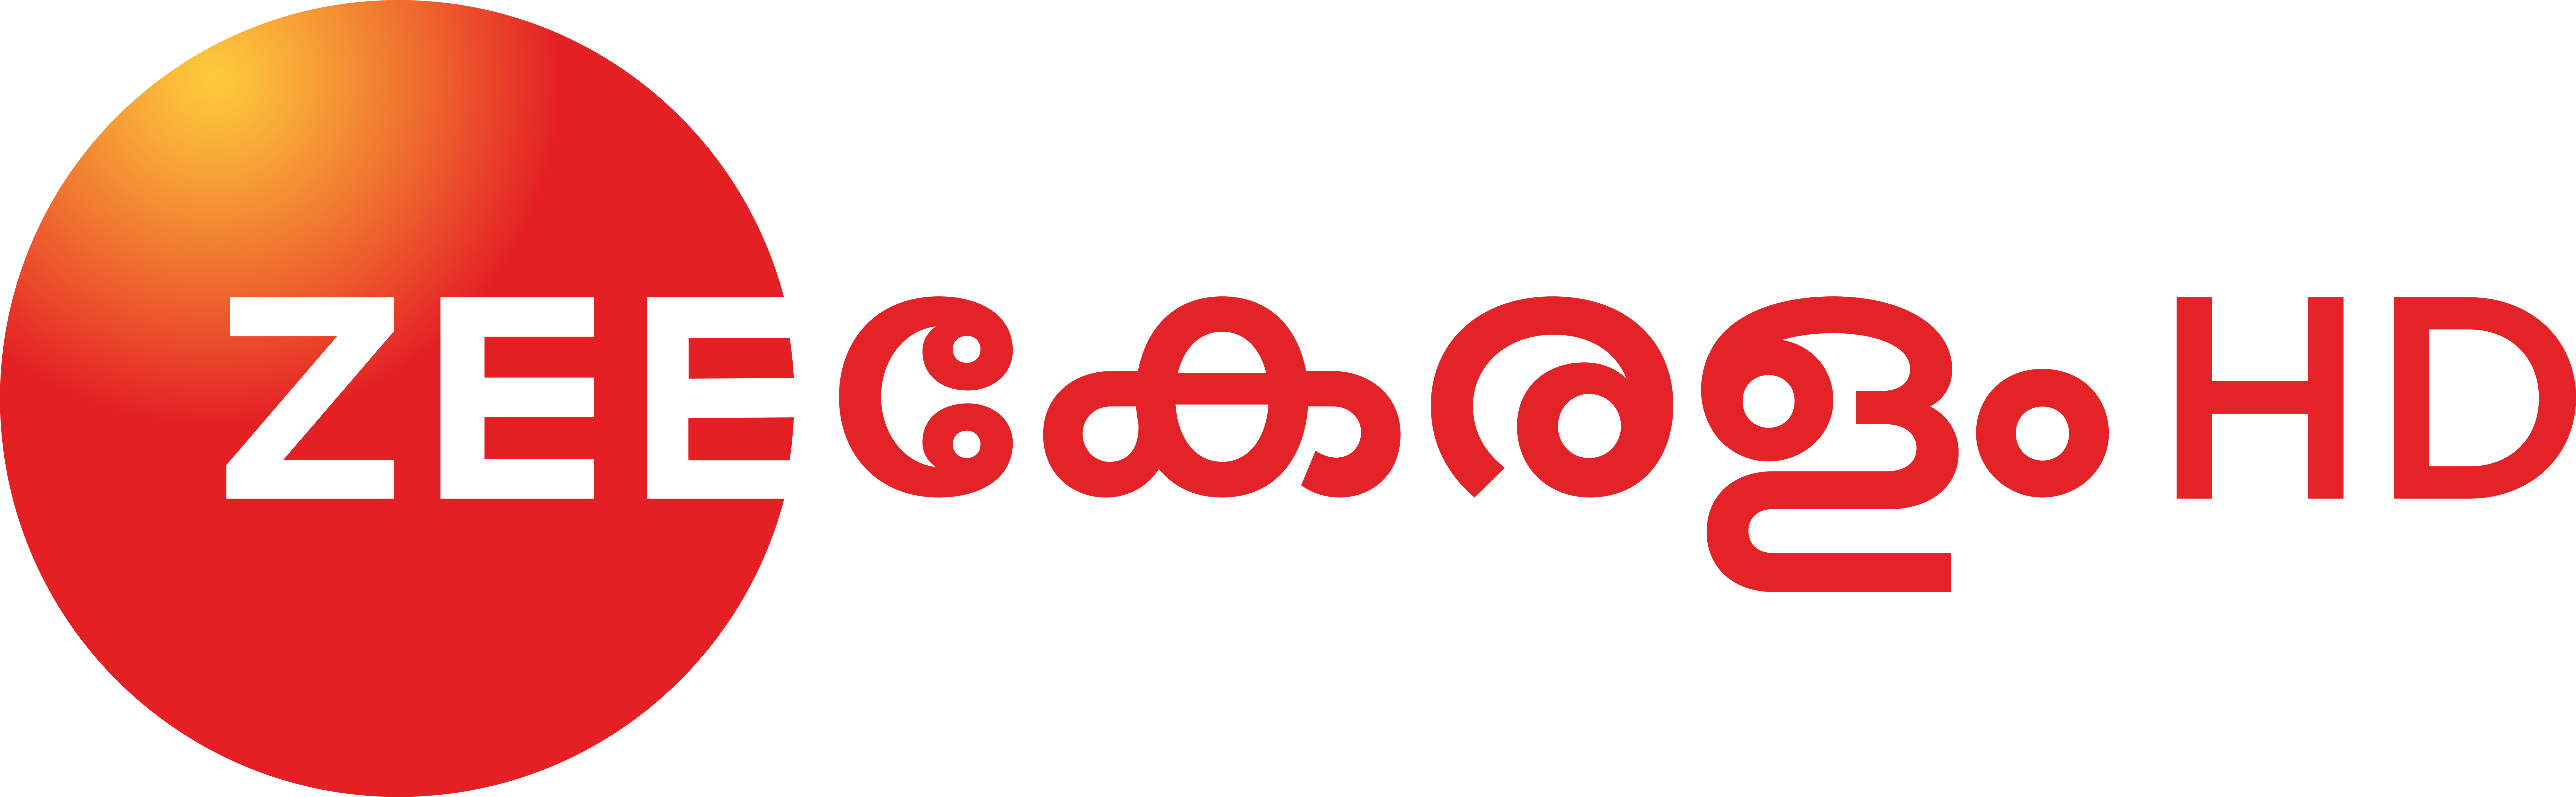 indian dth service with most malayalam channels